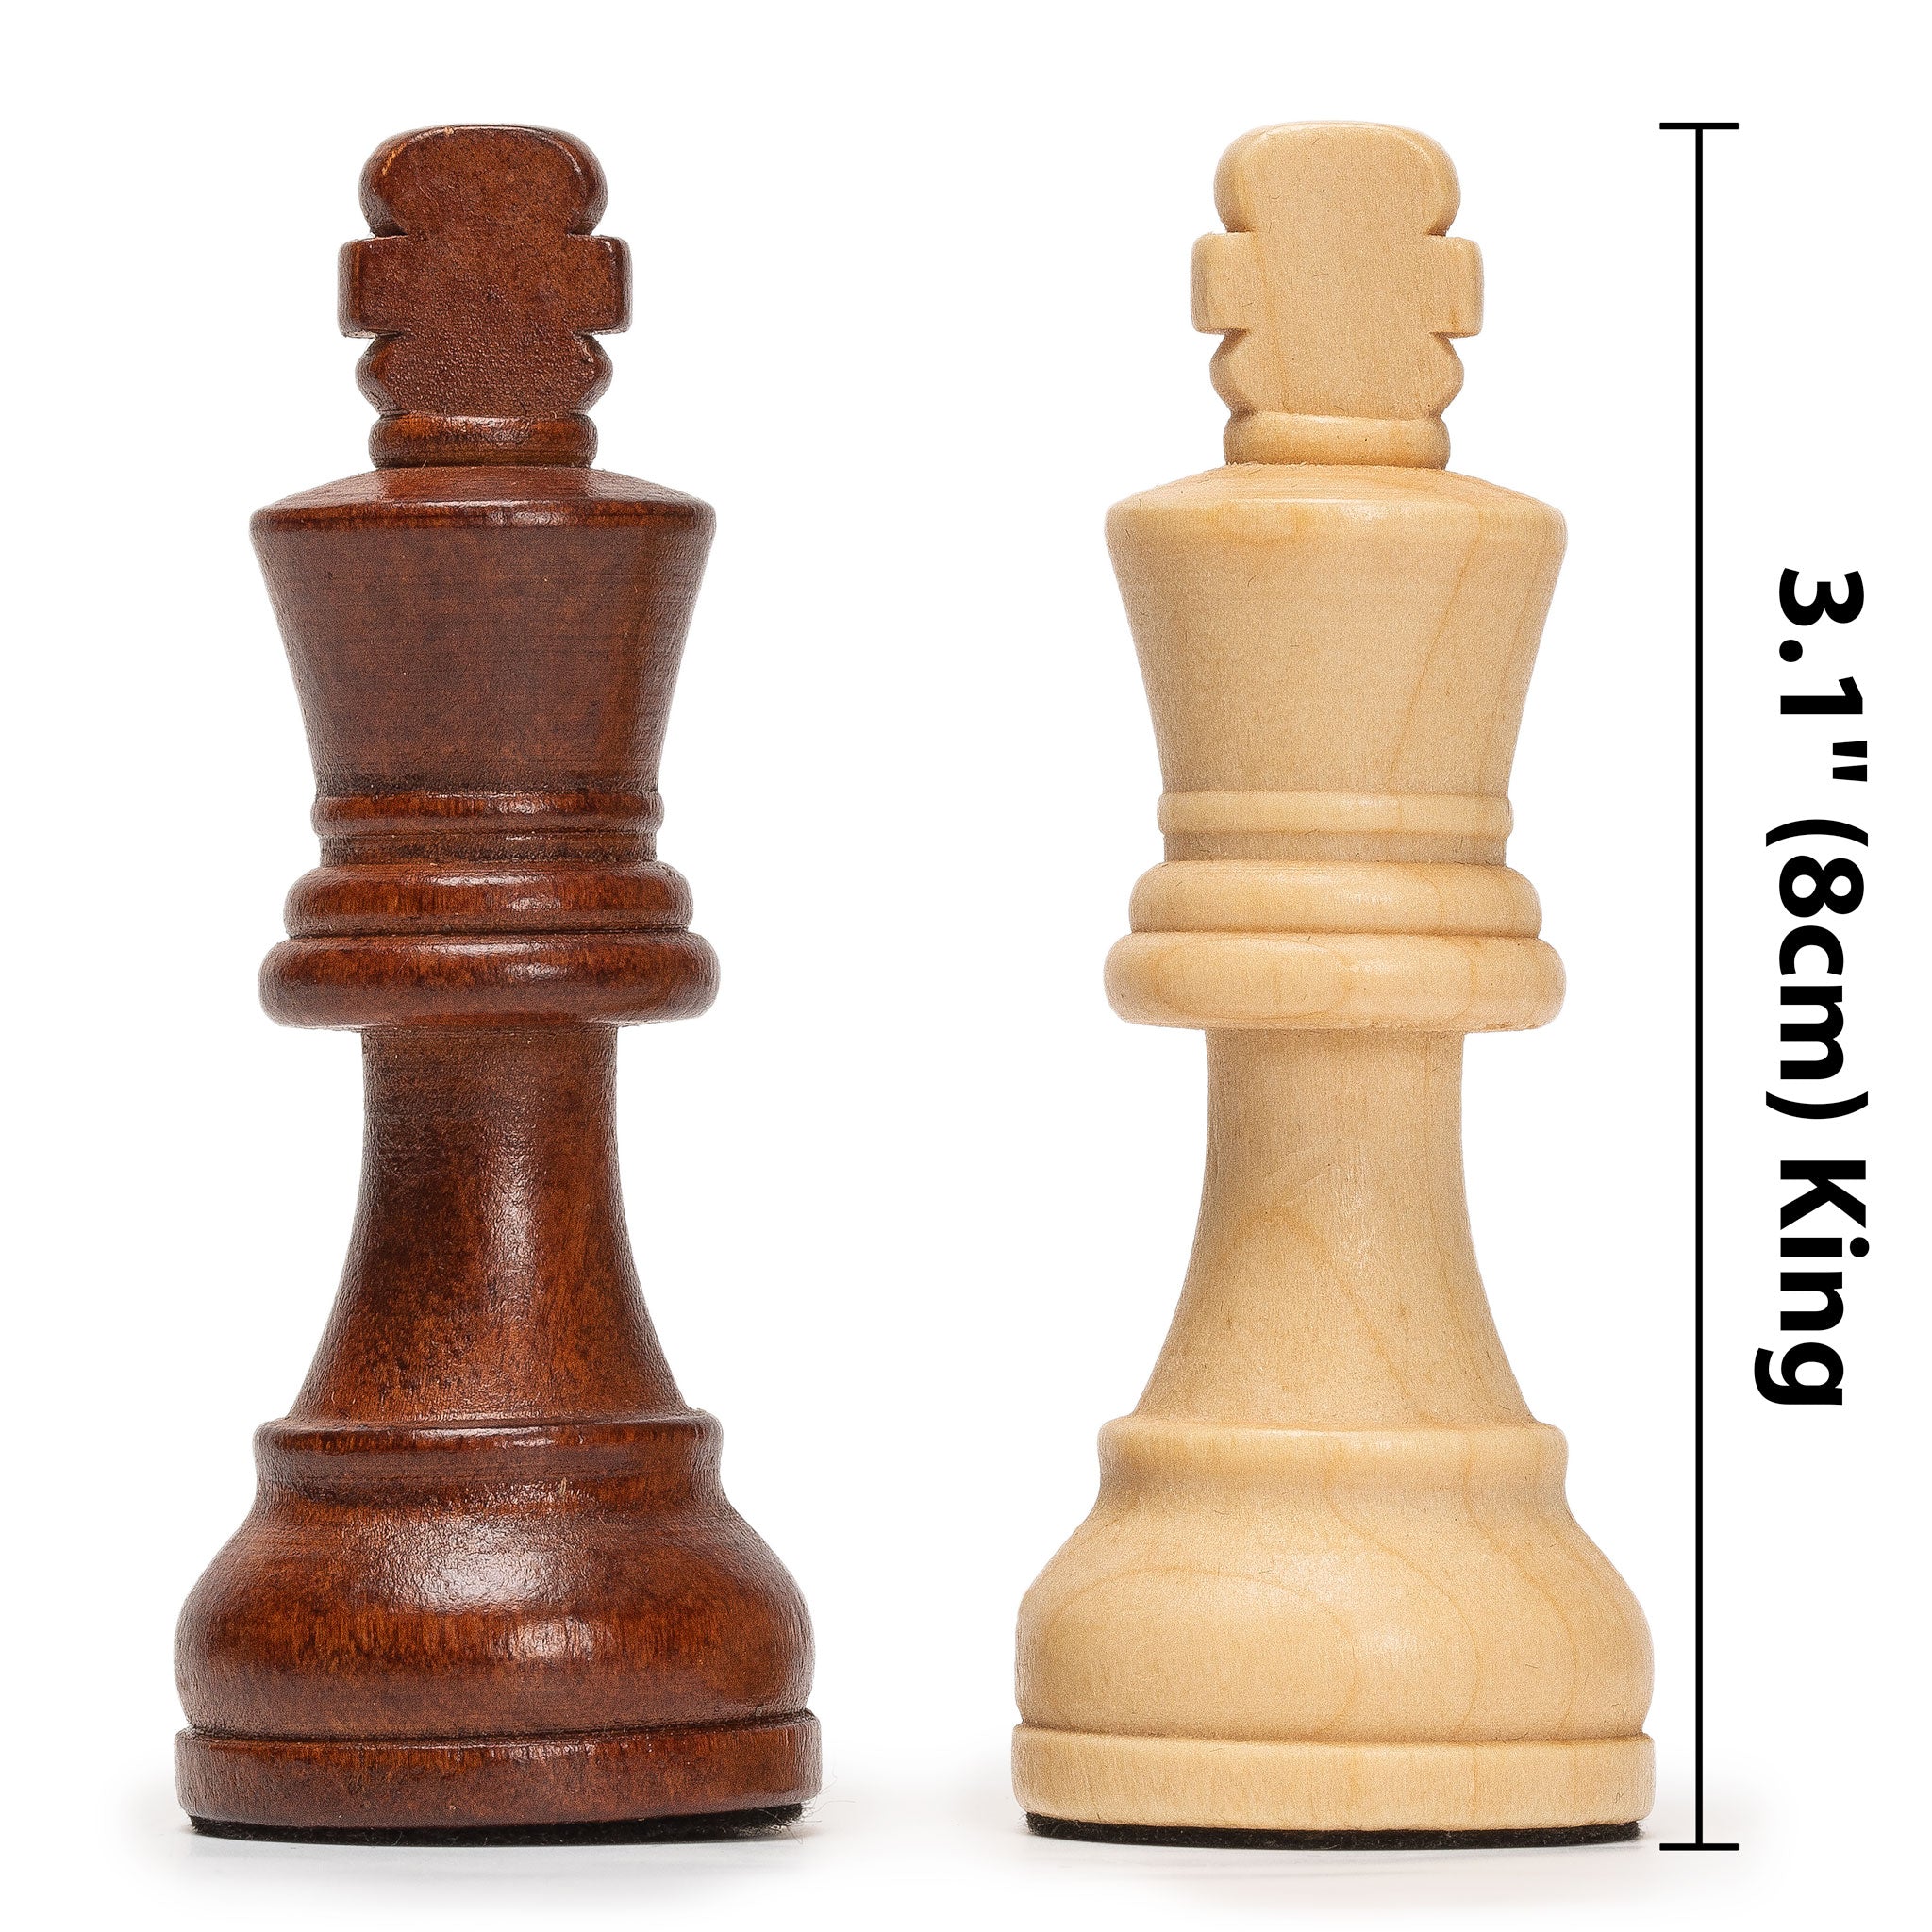 Husaria Staunton Tournament No. 4 Chessmen with 2 Extra Queens and Wooden Box, 3" Kings